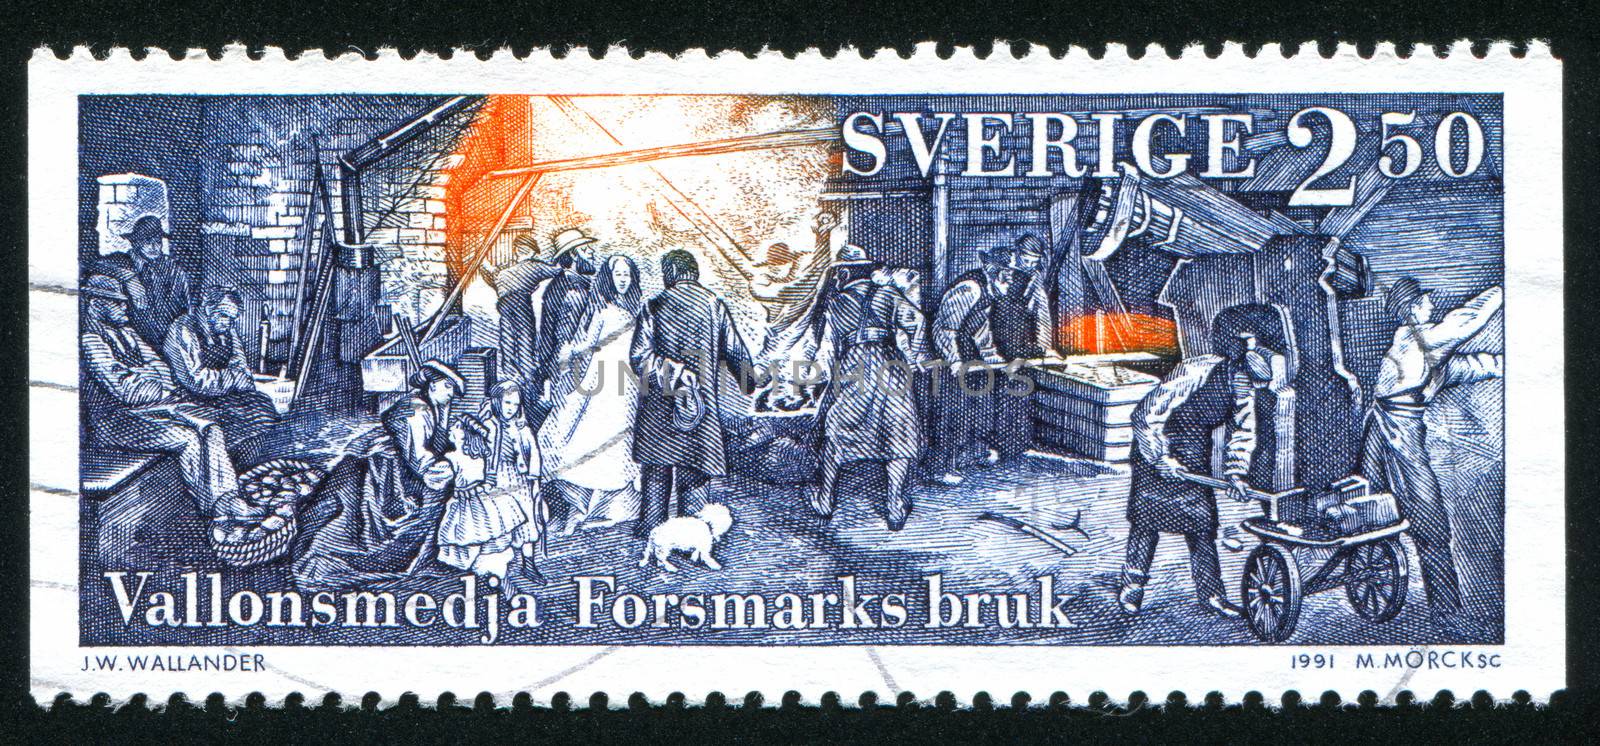 SWEDEN - CIRCA 1991: stamp printed by Sweden, shows Forsmark Mill, circa 1991